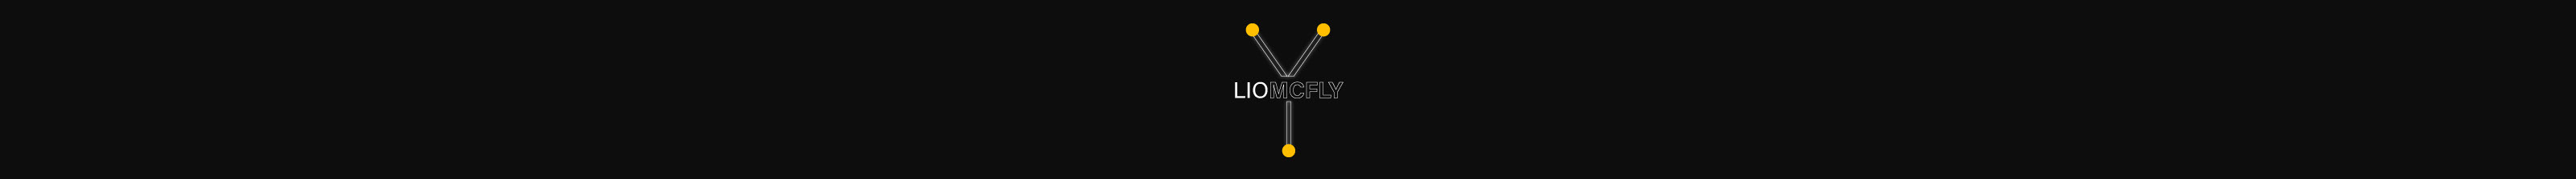 Lio McFly's profile banner